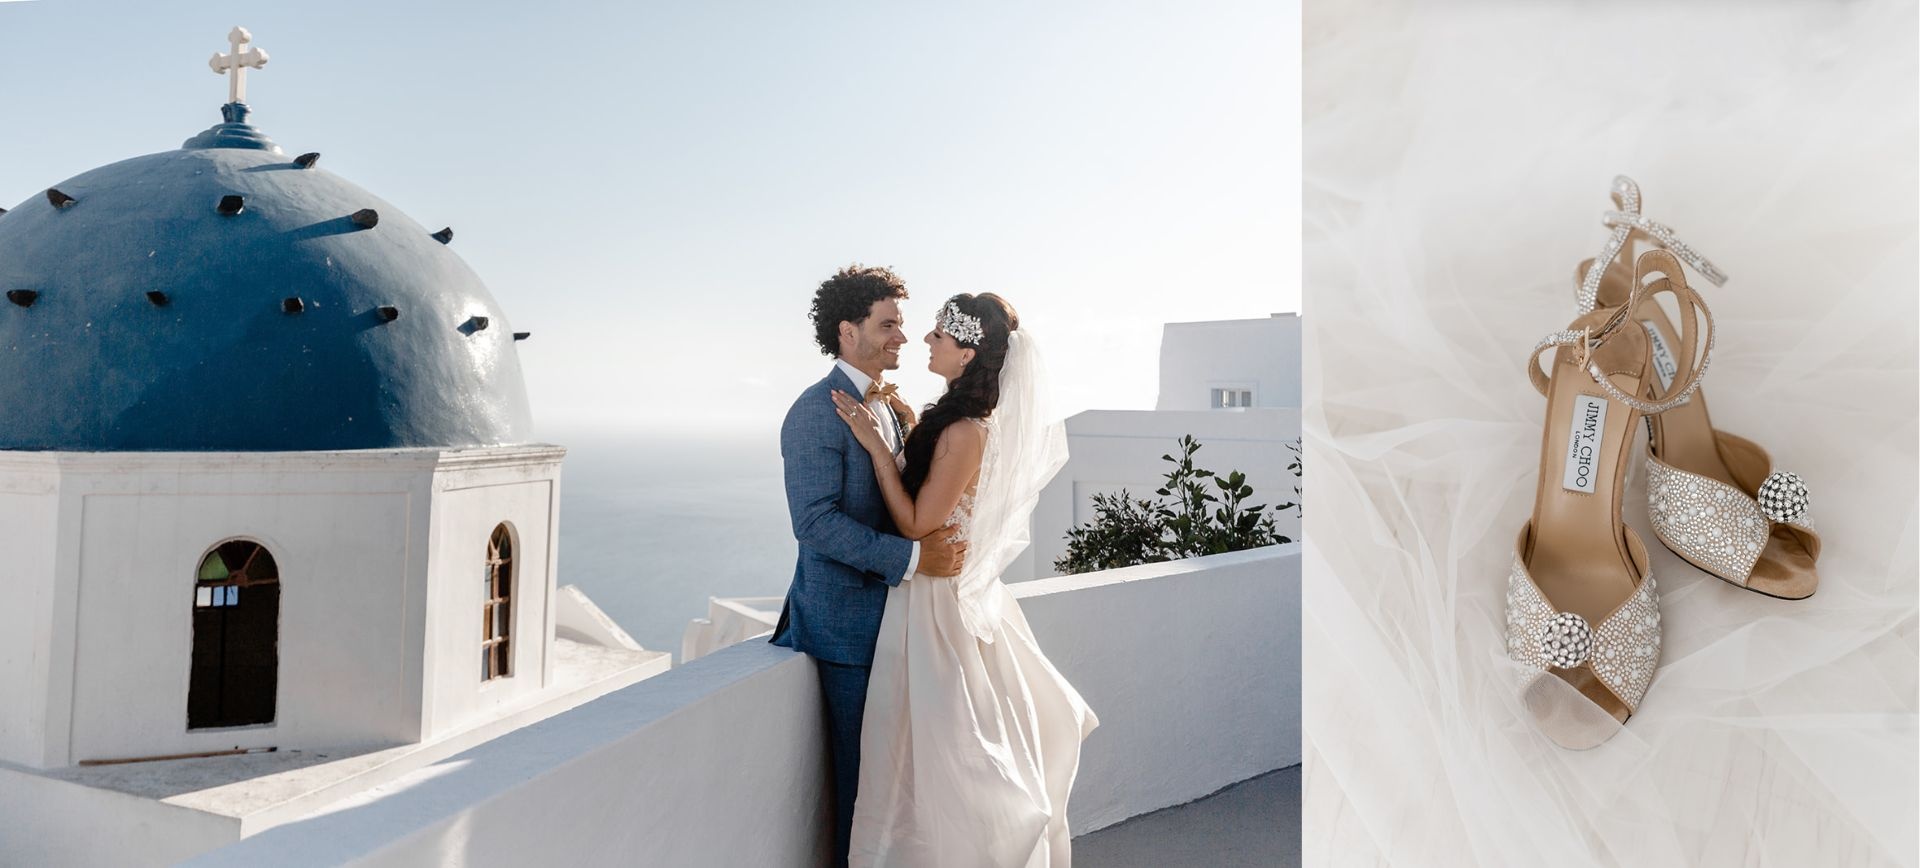 santorini greece all inclusive wedding package planning photography venue